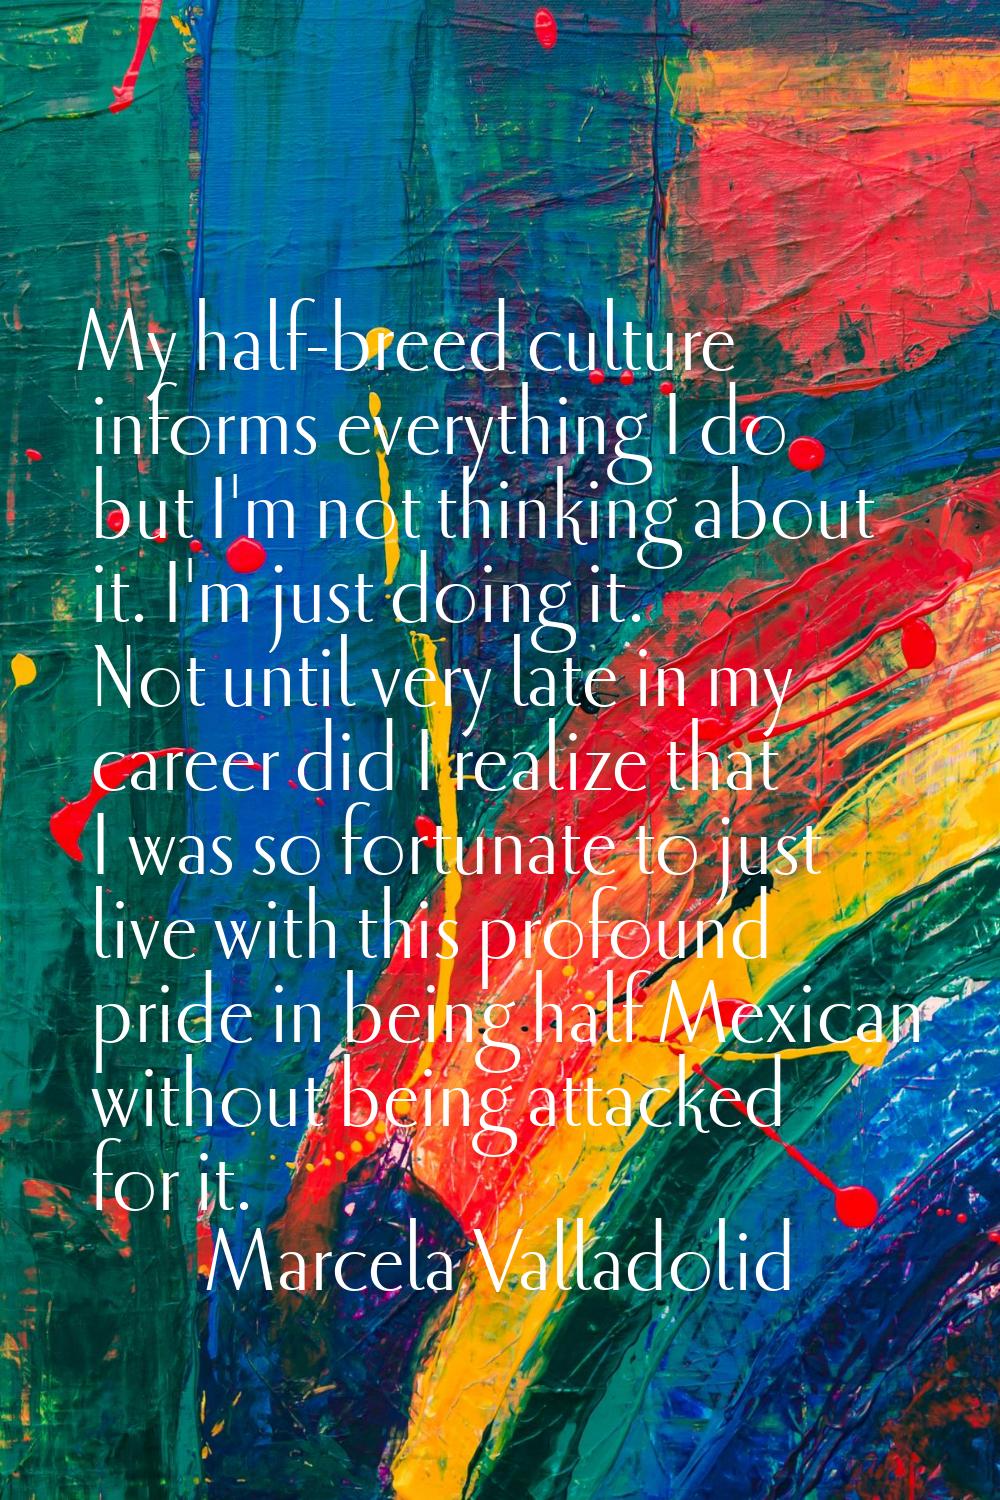 My half-breed culture informs everything I do but I'm not thinking about it. I'm just doing it. Not